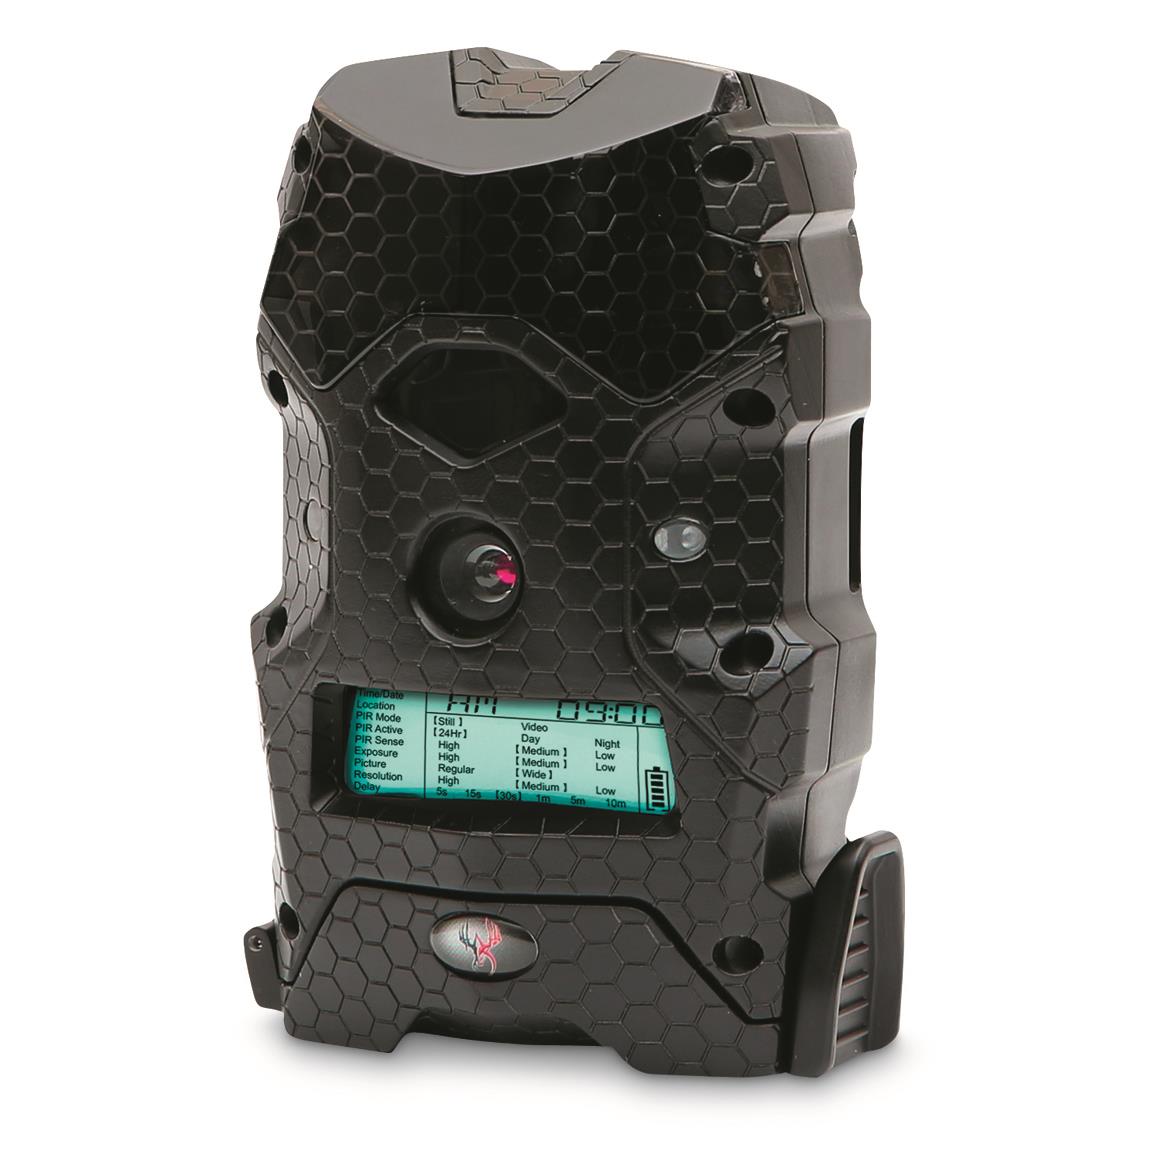 Wildgame Innovations Mirage 14 LIGHTSOUT Trail/Game Camera, 14MP